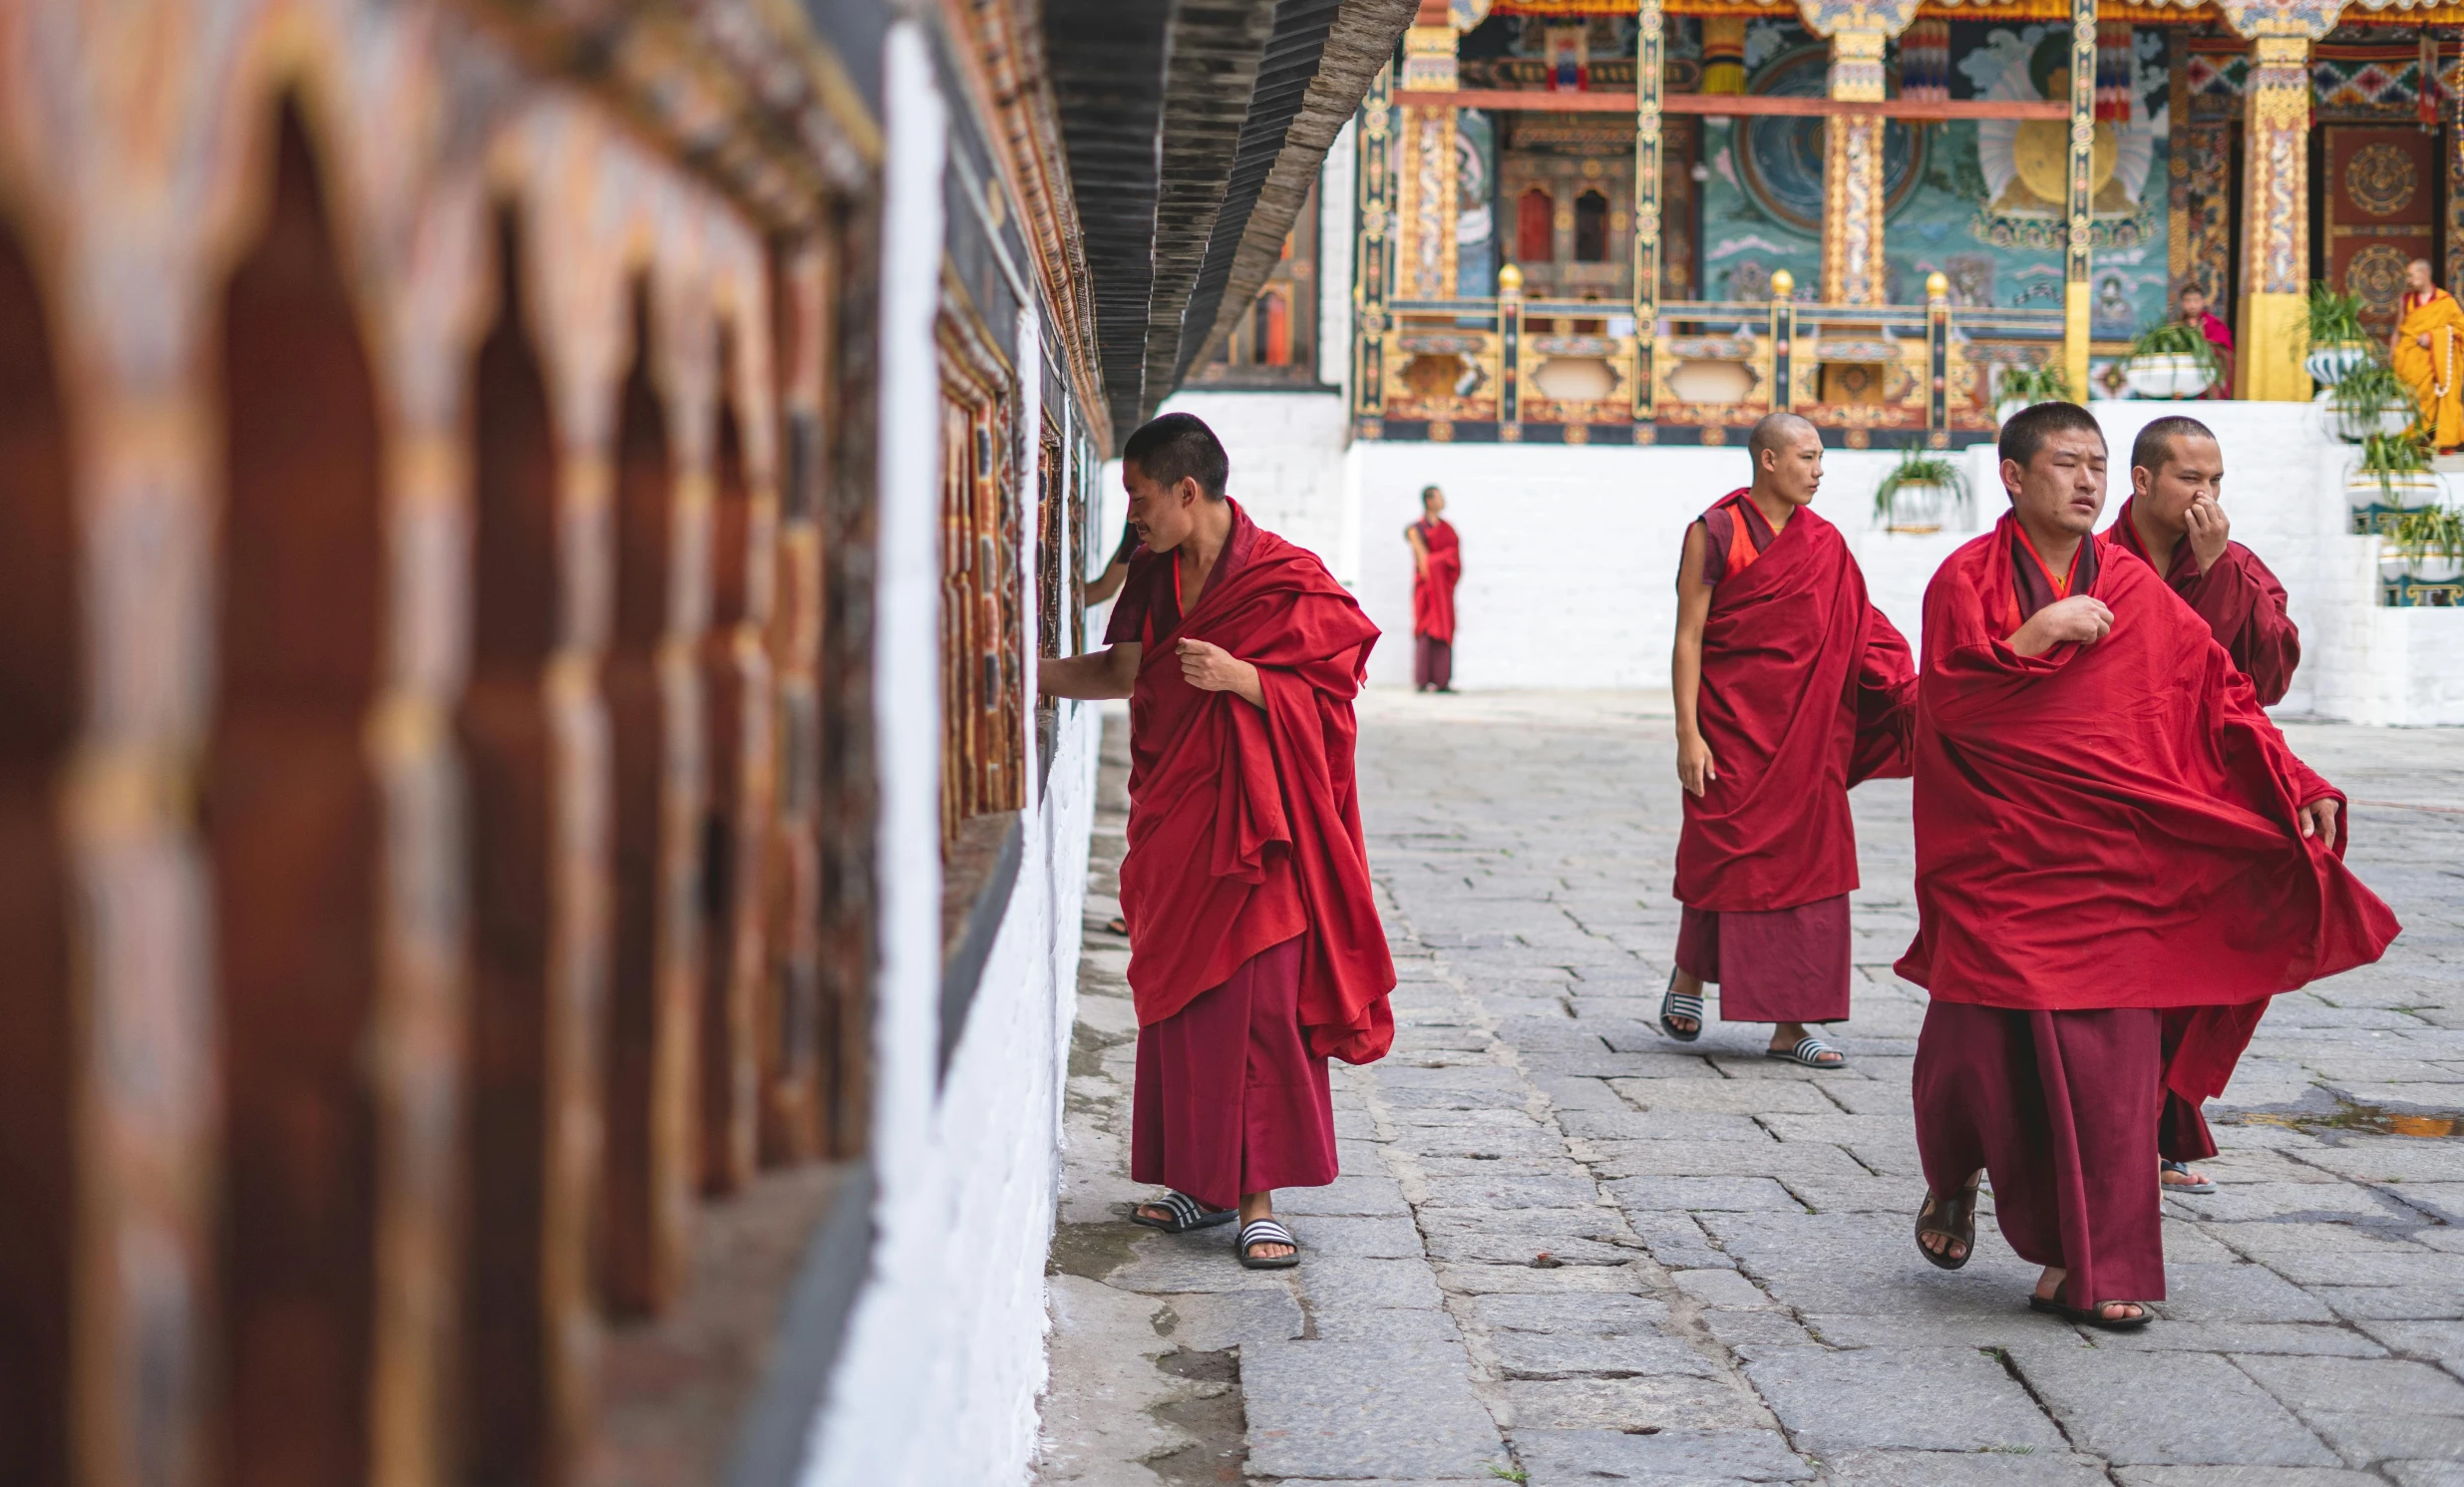 monks walking down a path with white walls in the background